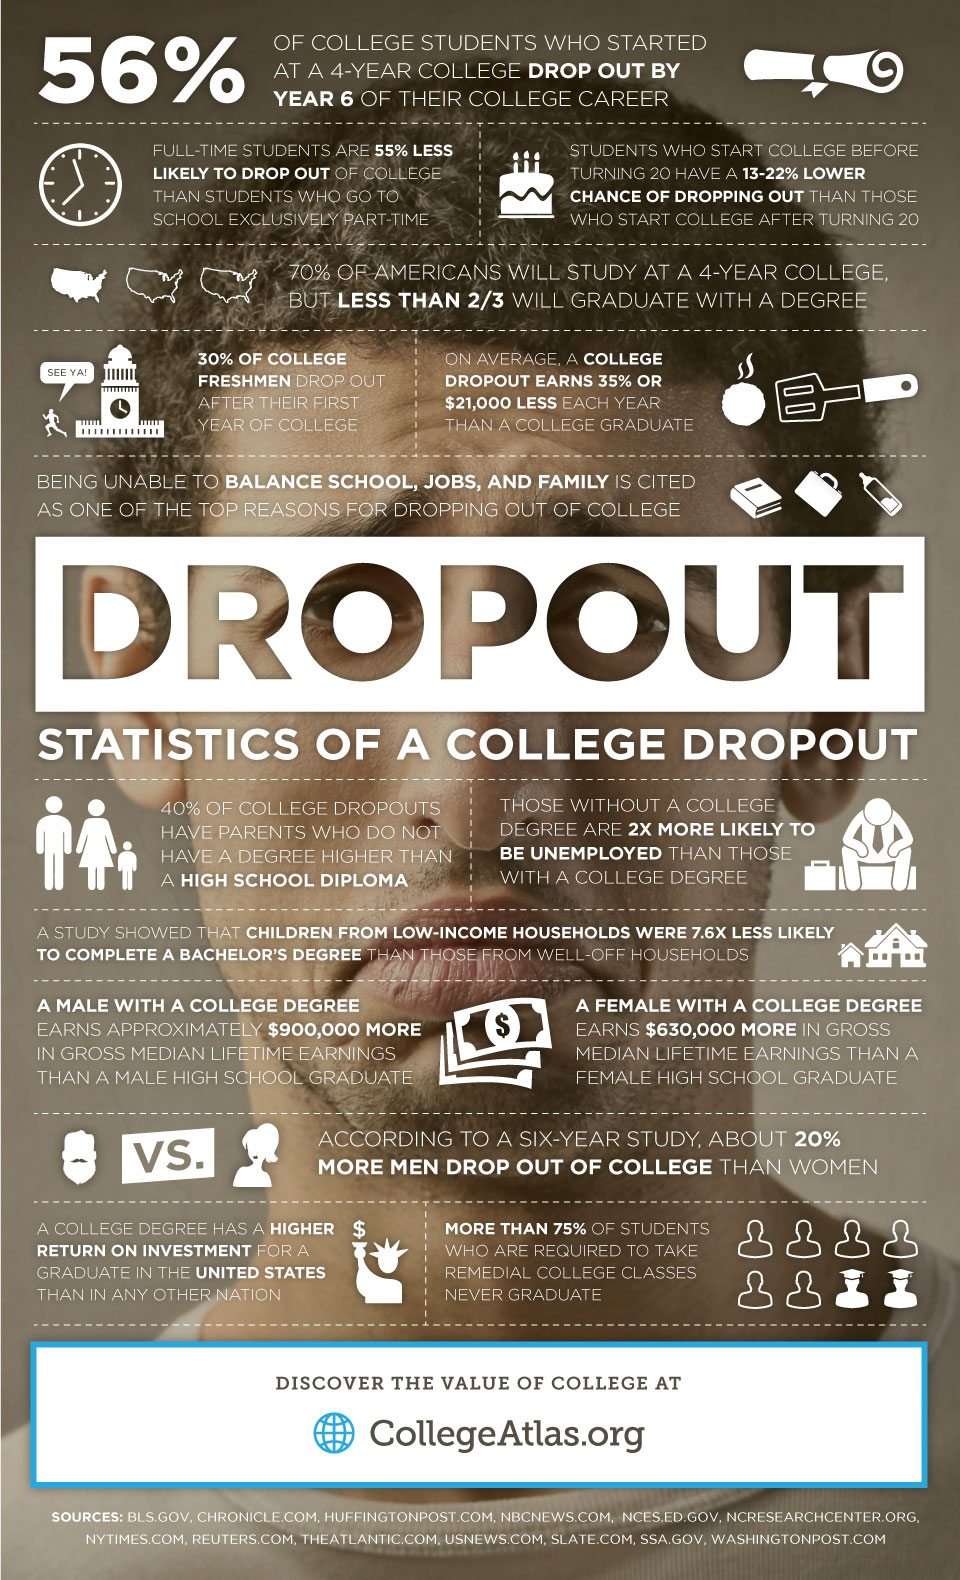 8 Ideas to Consider Before Dropping Out of College